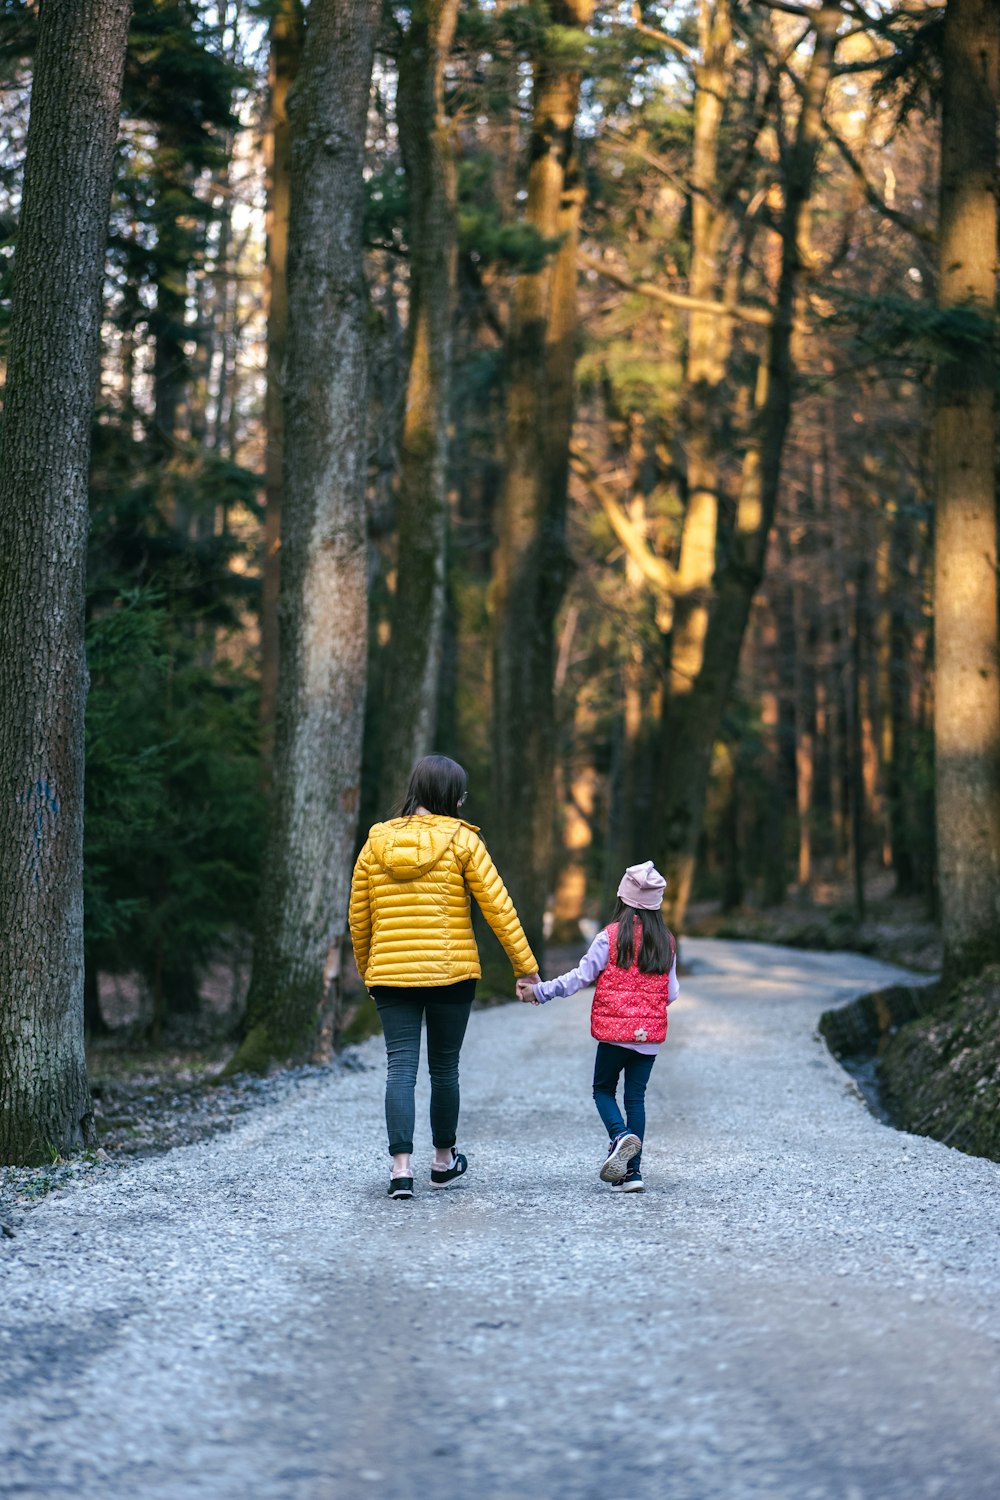 a person and a child walking on a path in the woods